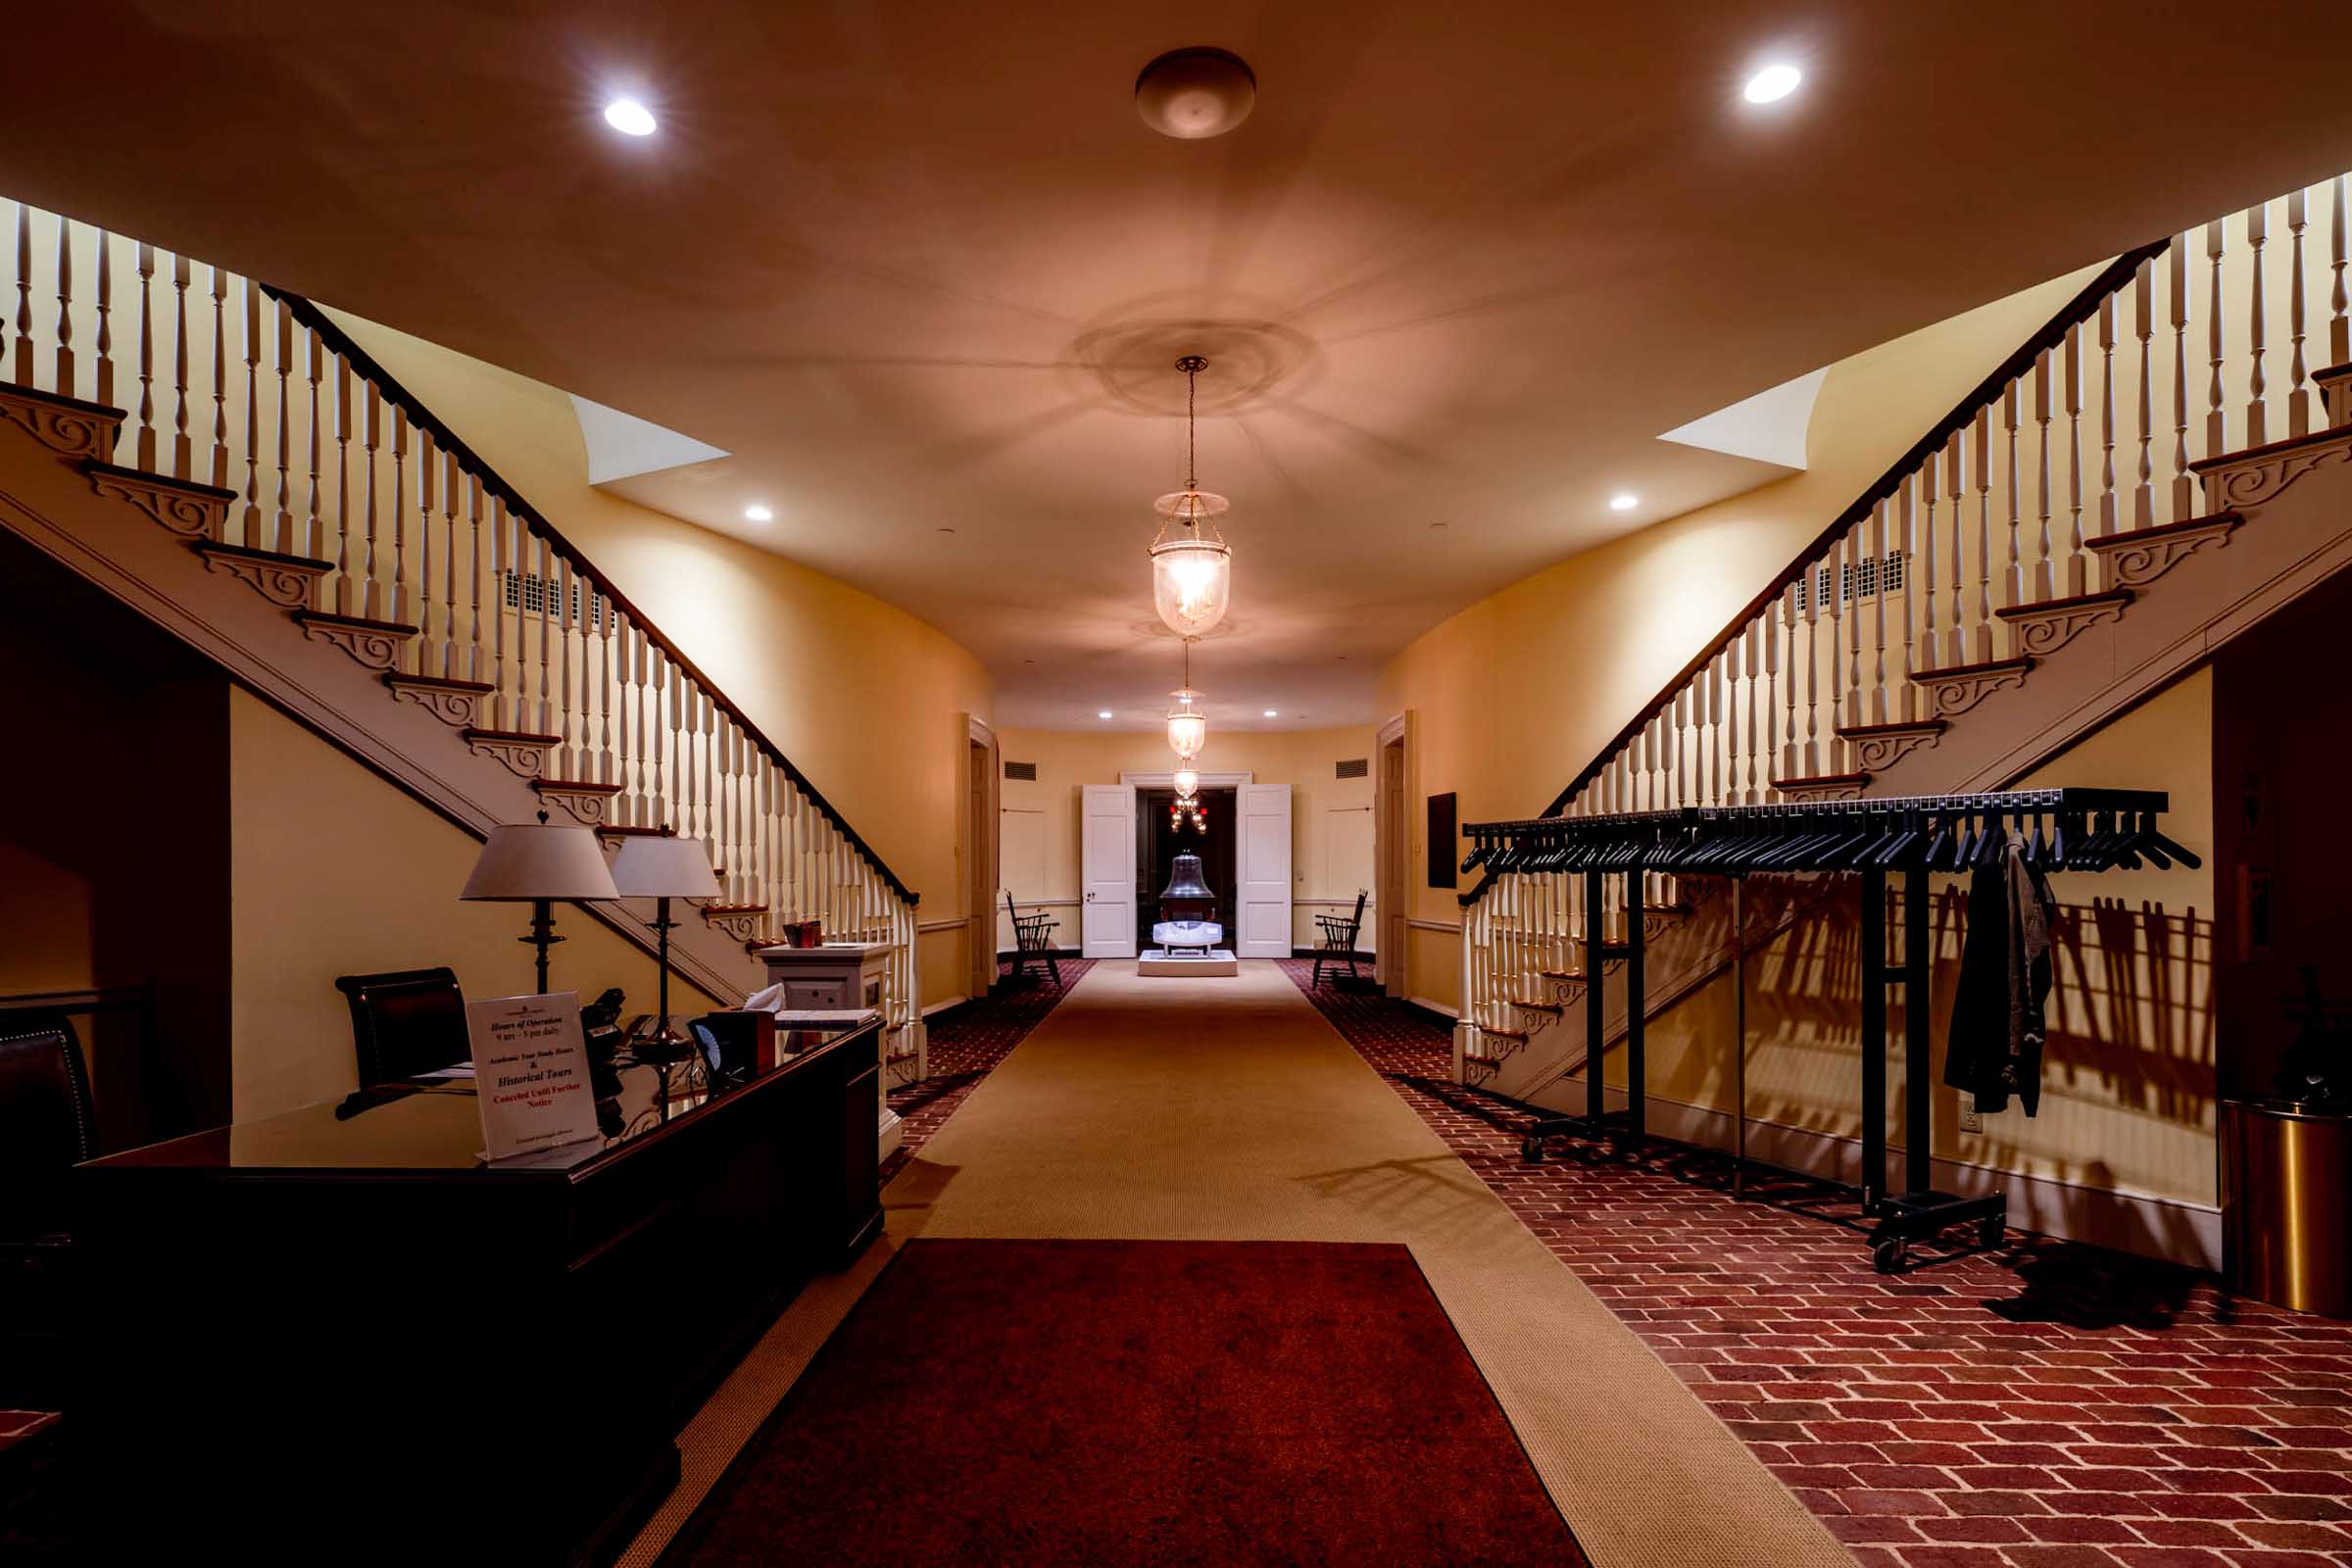 Empty carpeted hallway with two stair cases one on each side